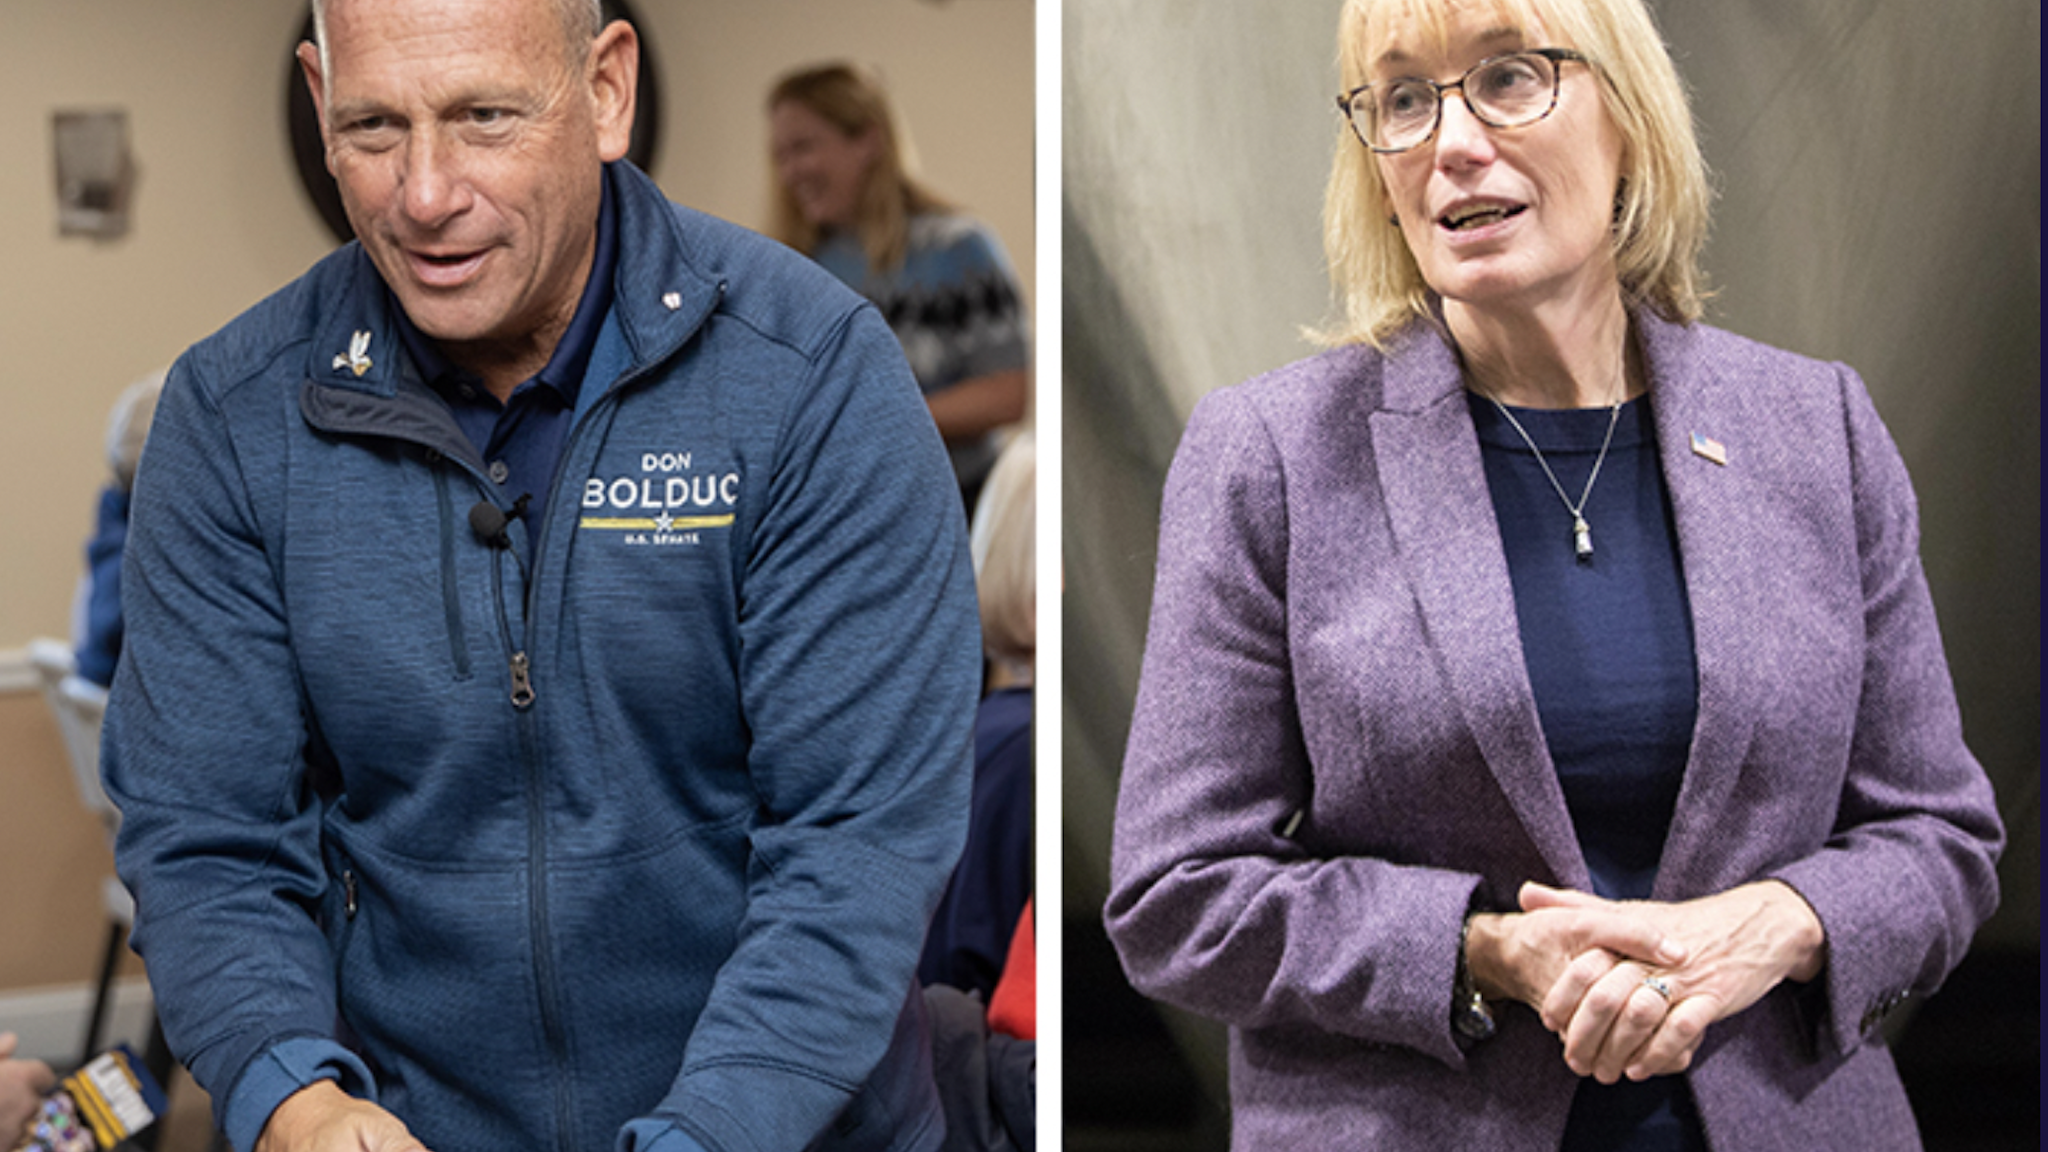 Retired US Army Brigadier Gen. Don Bolduc has pulled ahead of incumbent Democrat Maggie Hassan in the New Hampshire Senate race.